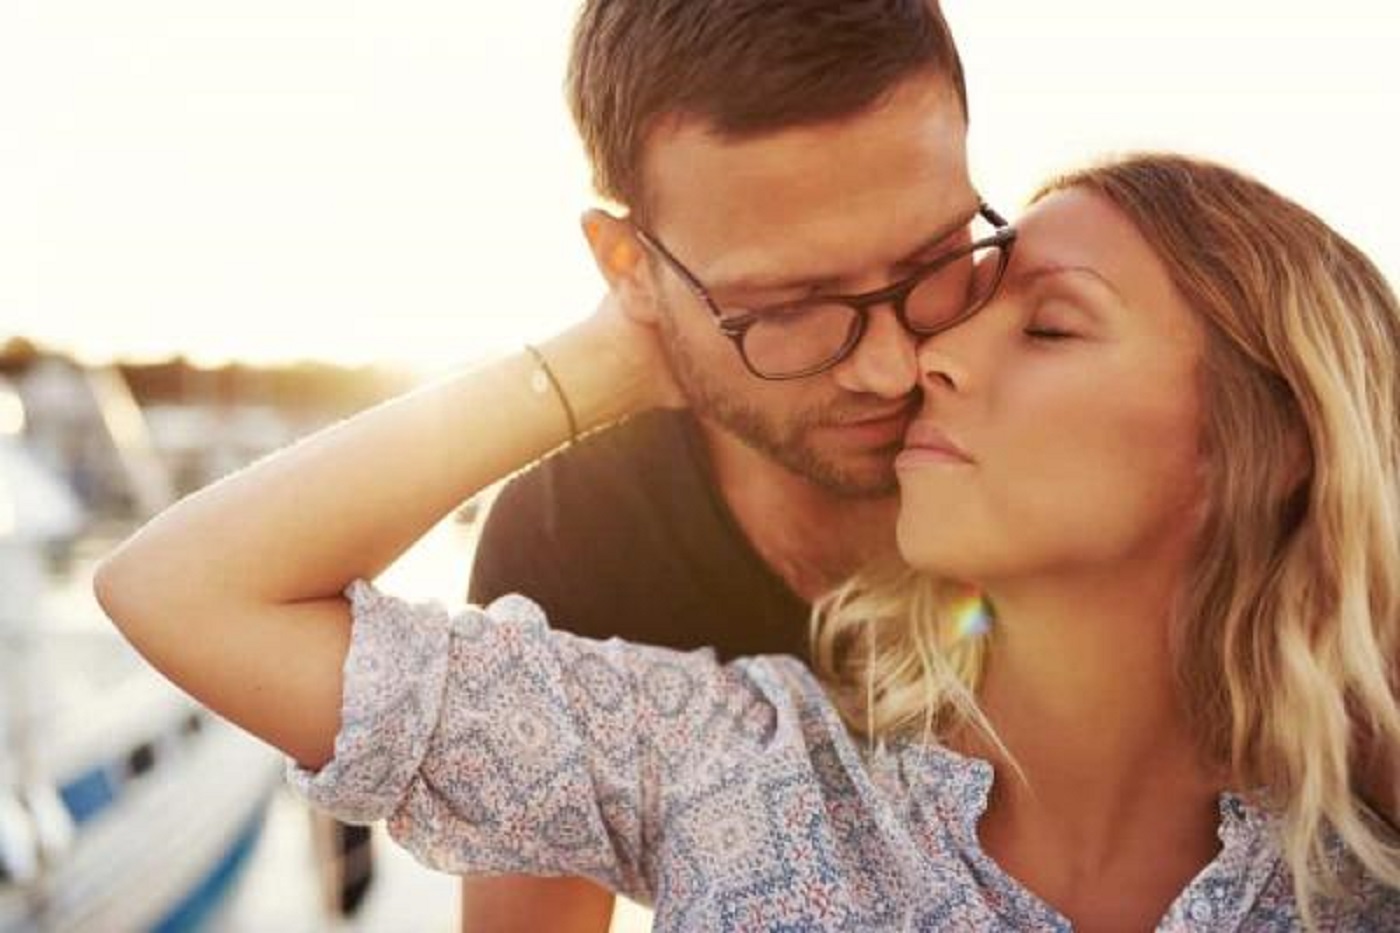 5 Truths About Men and Sex That Will Change Your Relationship